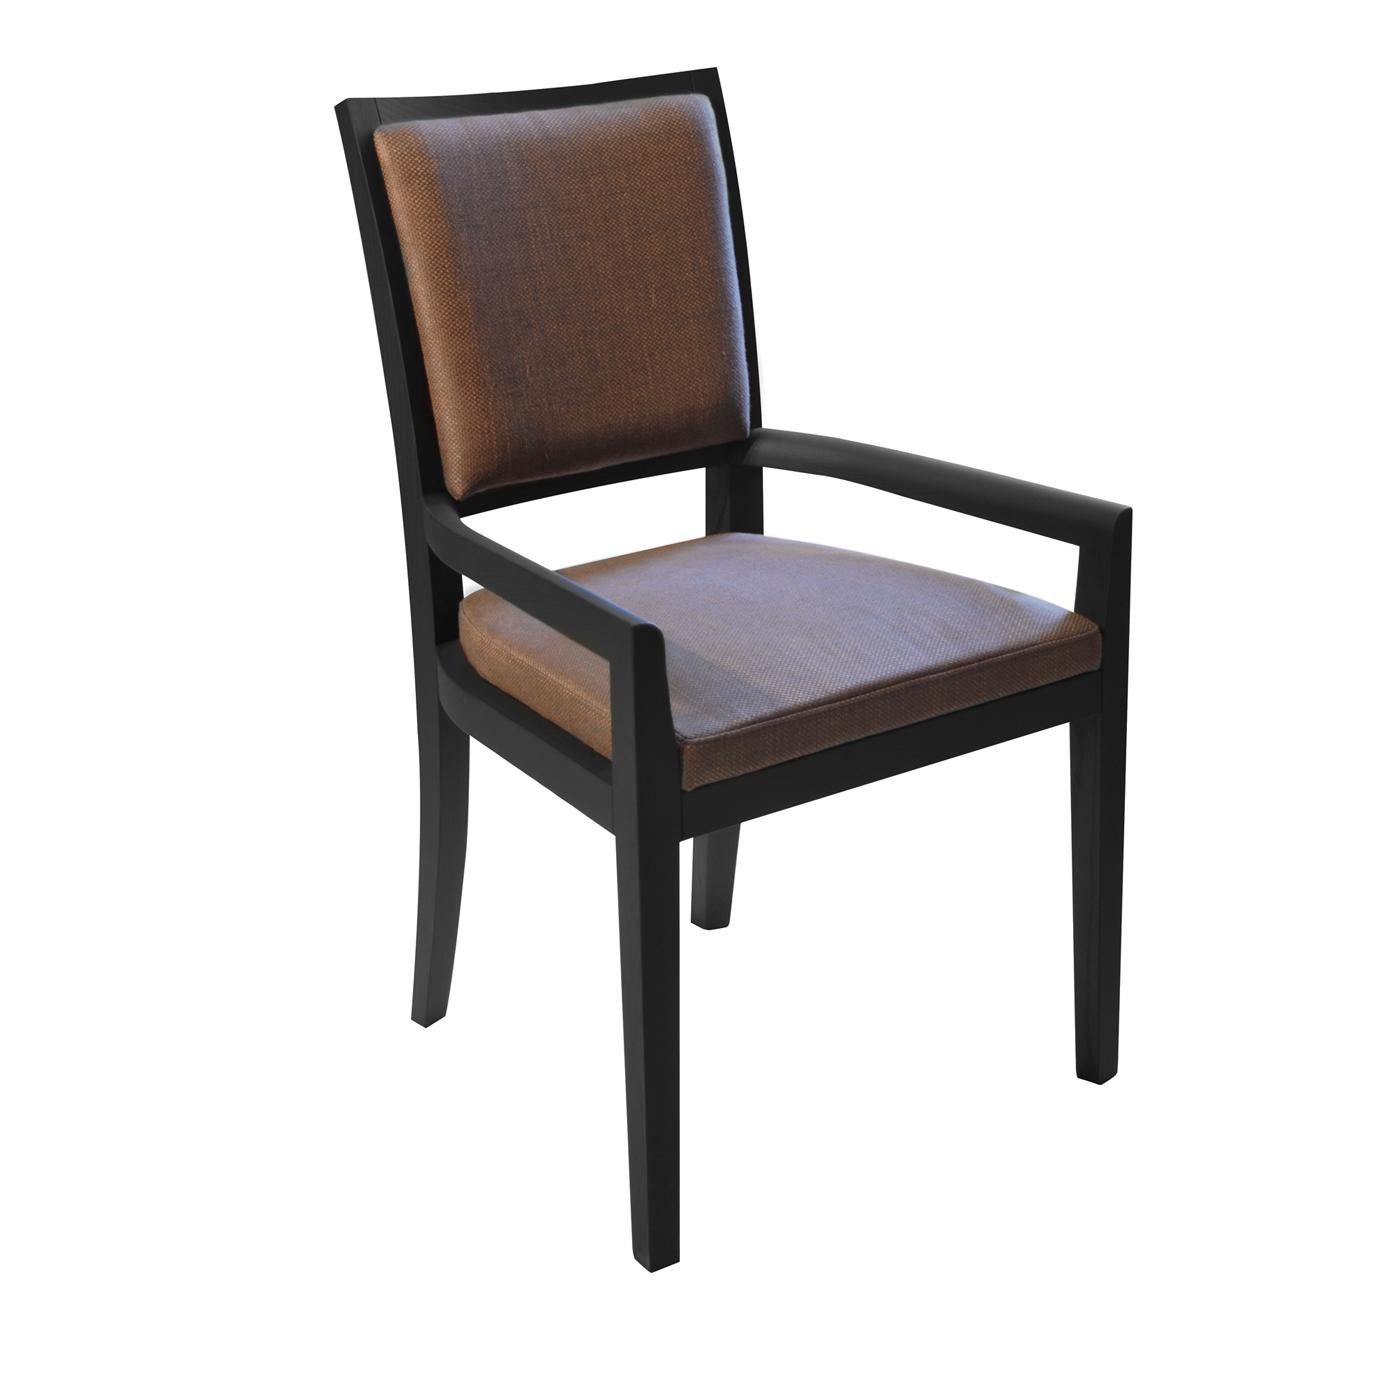 Bold and sleek, this chair with armrests is marked by a simple design and timeless elegance. Its clean structure is fashioned of stained solid ash and comprises sturdy legs and armrests. Seat and backrest are upholstered in high-quality anthracite